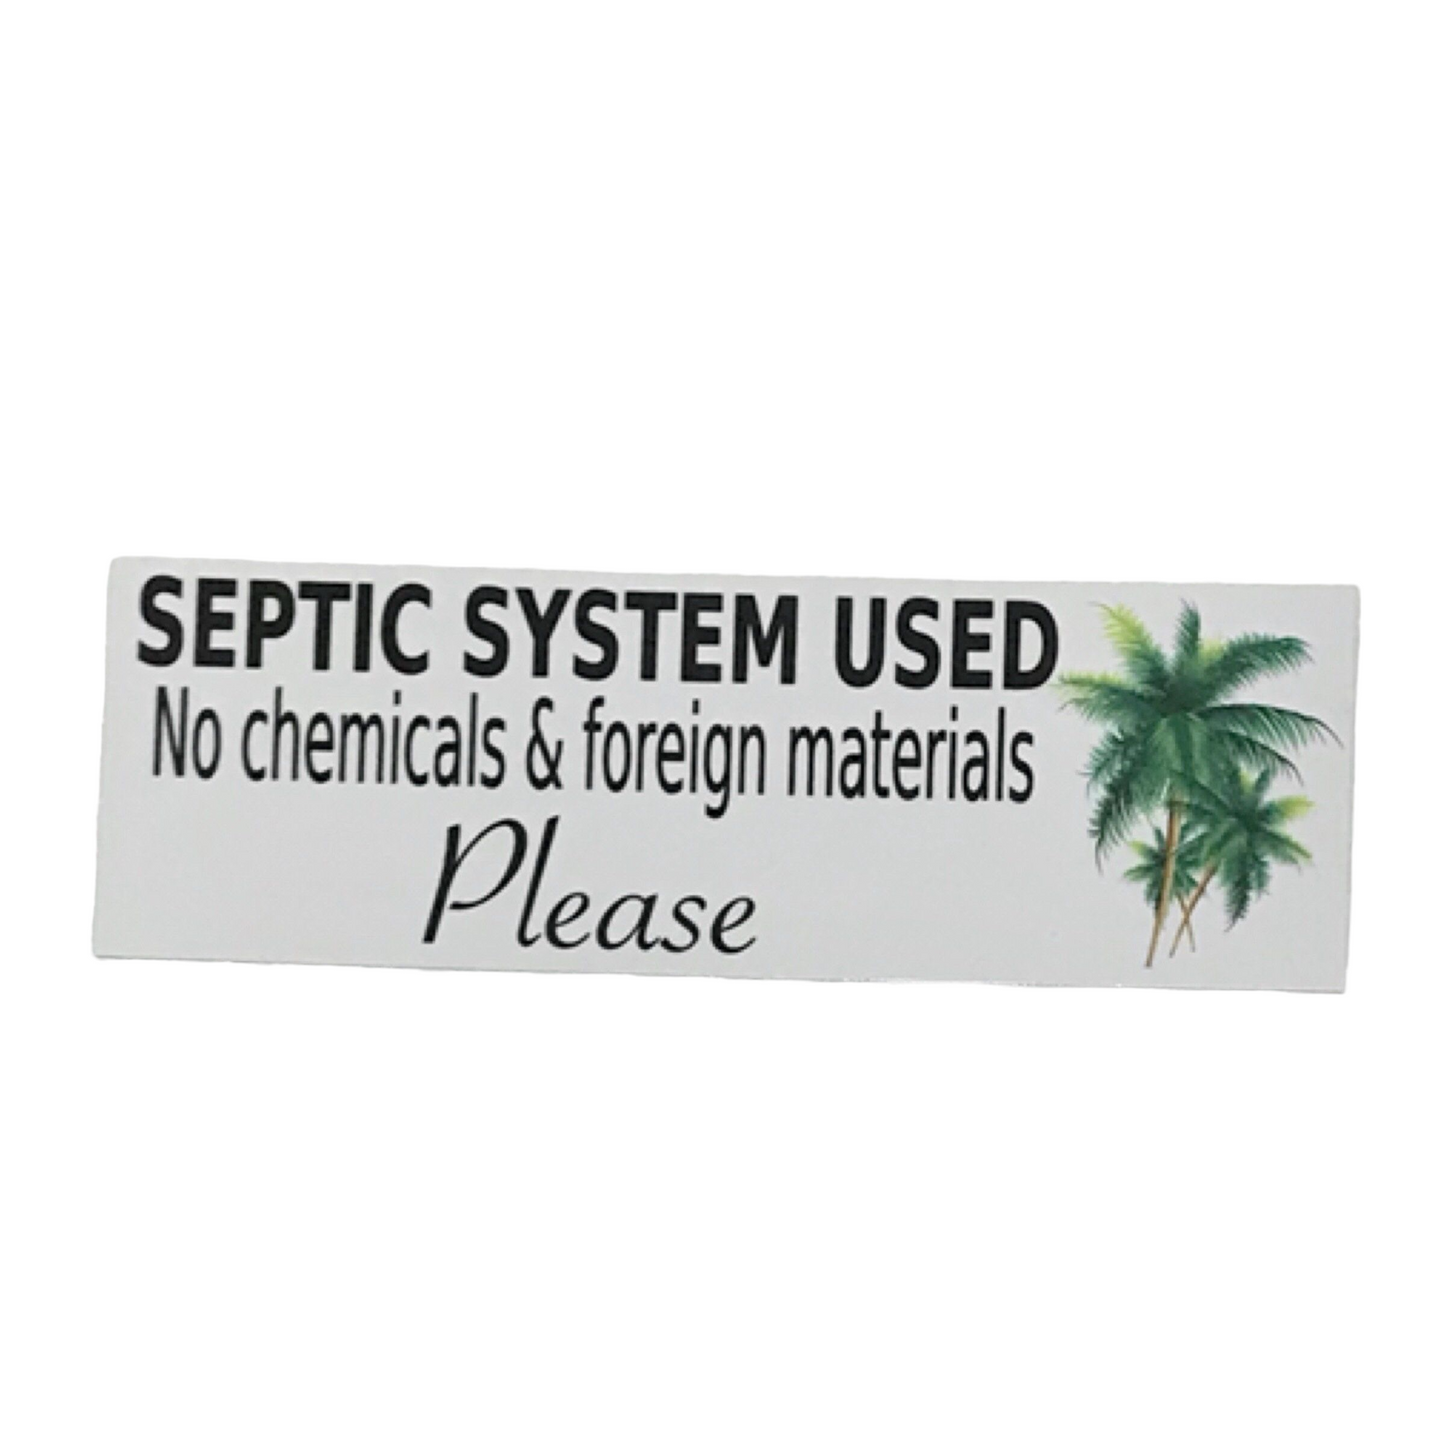 Toilet Septic System Tropical Palm Trees Sign - The Renmy Store Homewares & Gifts 